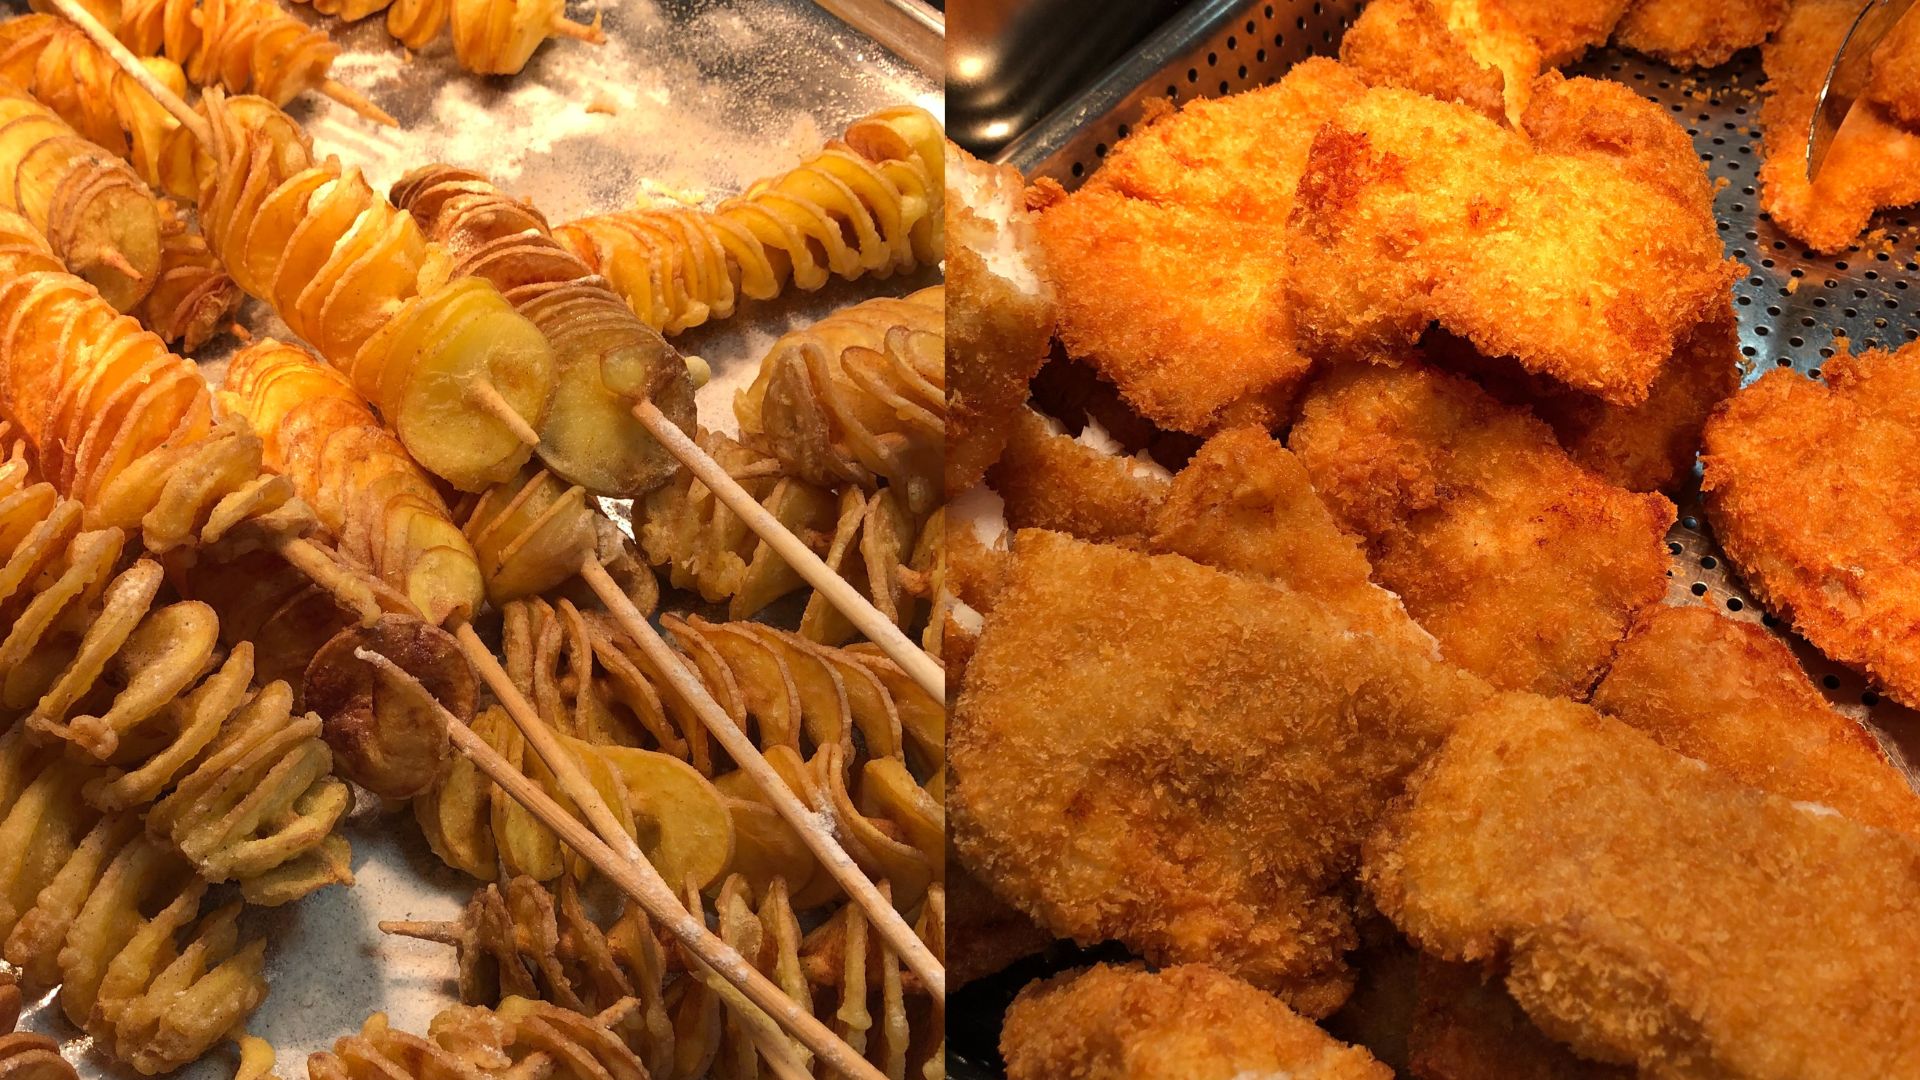 Side by side images of fried potatoes on a stick and fried breaded fish